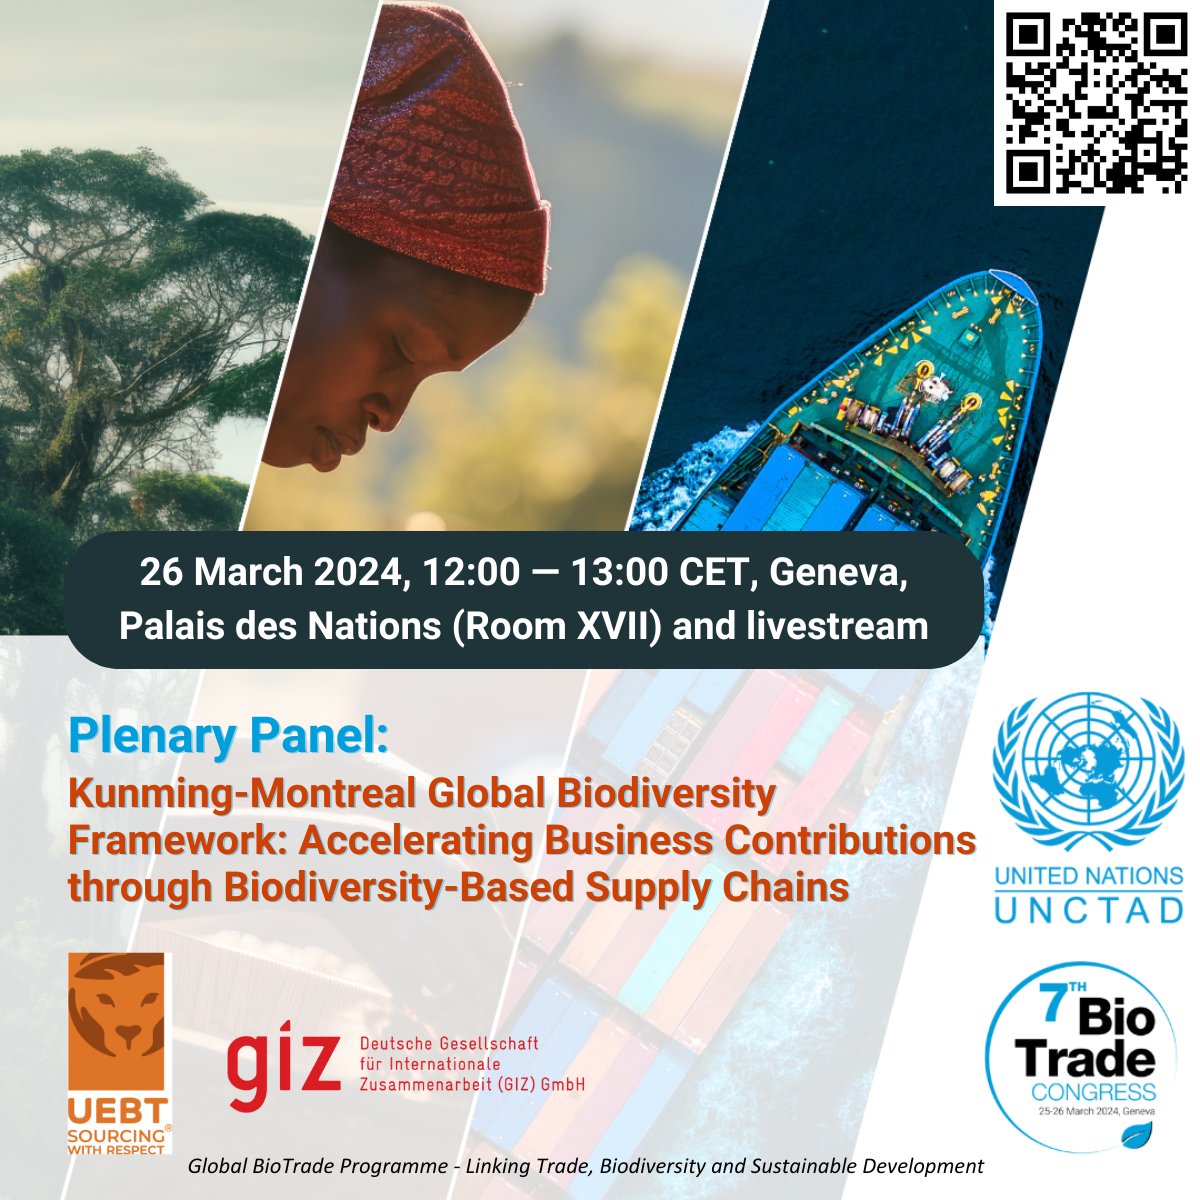 Next at the 7th #BioTrade Congress. Learn how business can support implementation of the goals and targets of the #Biodiversityplan through biodiversity-based supply chains. Register for the session here: bit.ly/BioTrade-Congr… #BioTrade #Biodiversity #Trade #Biodiversityplan